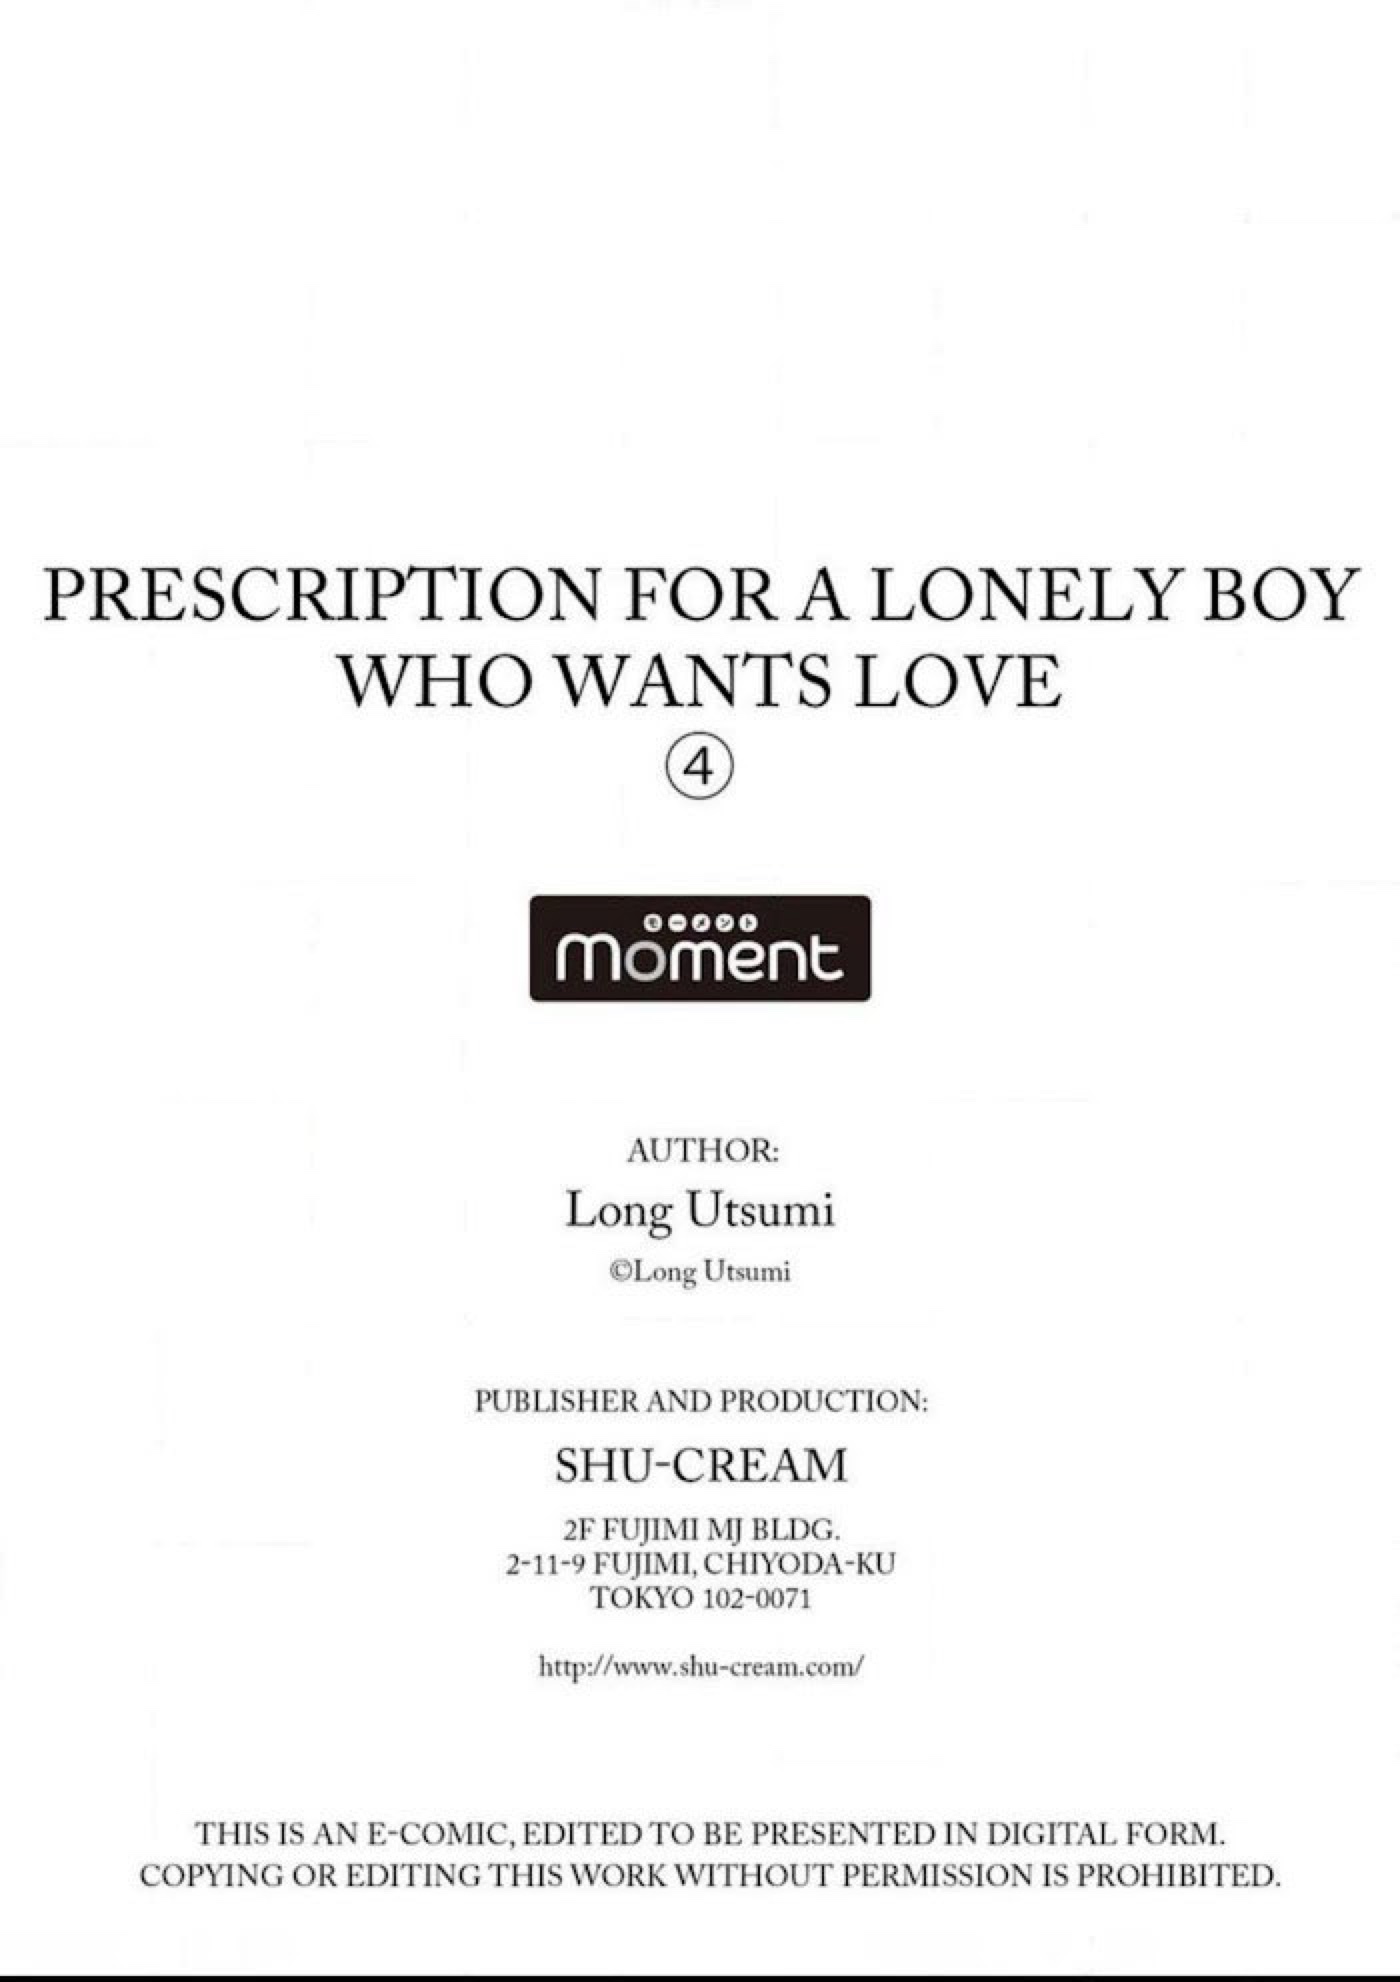 Prescription for a Lonely Boy Who Wants Love 4 (34)